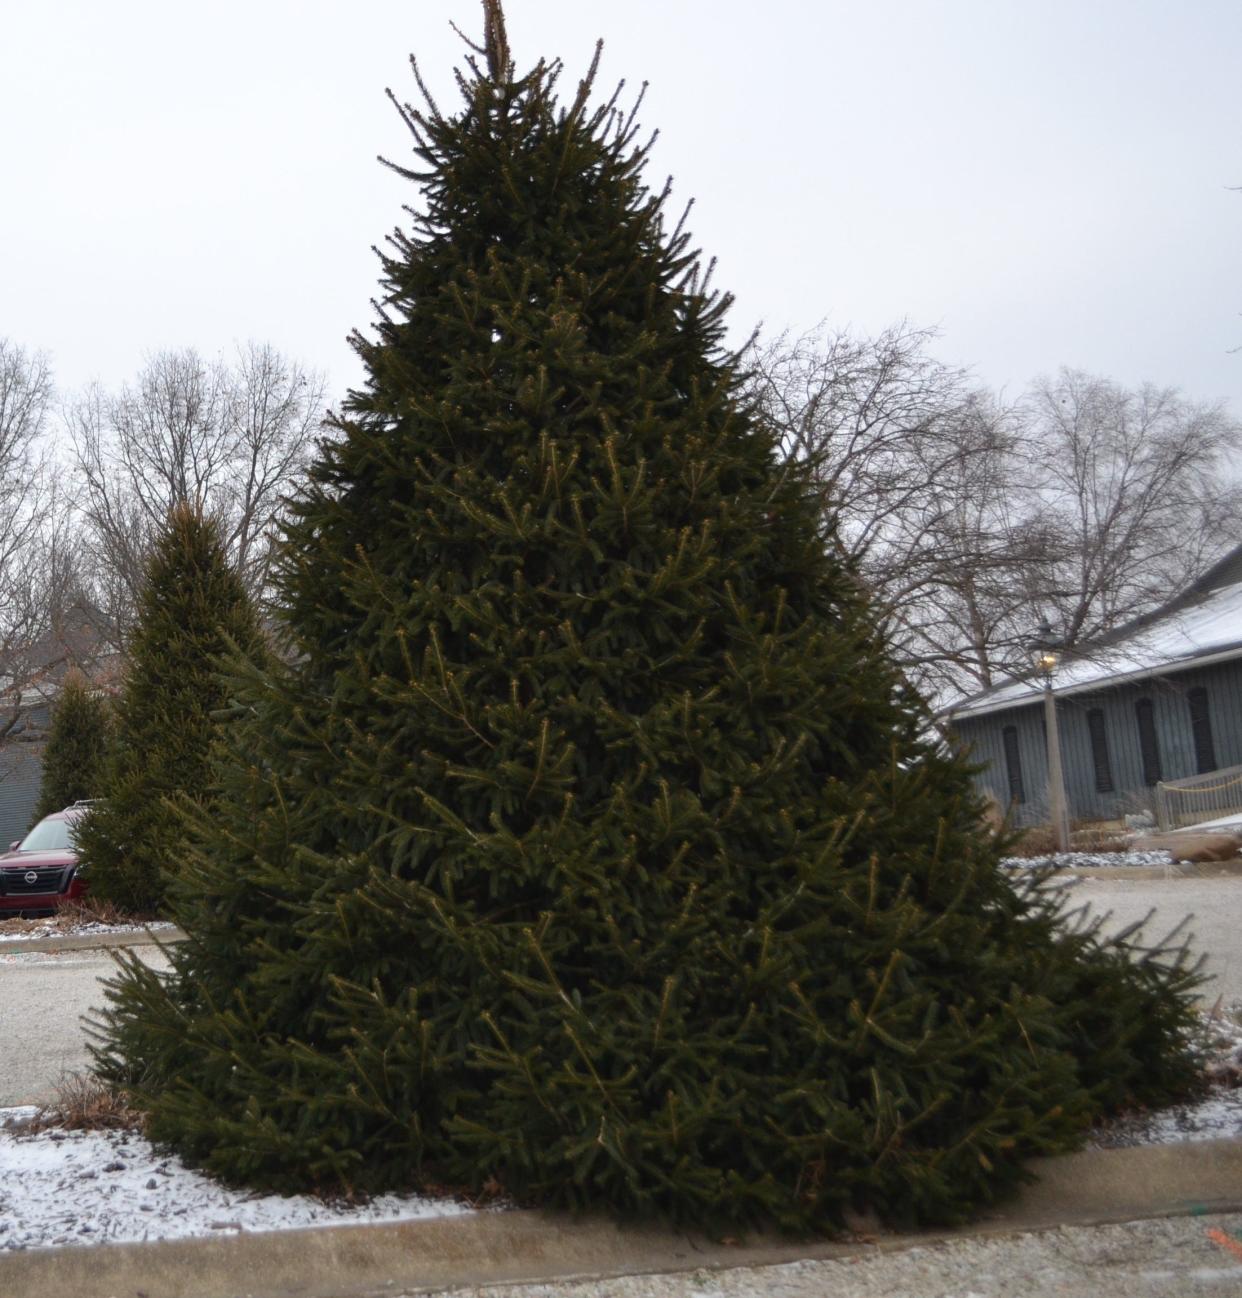 Deer usually avoid plants and trees that have strong scents, like this spruce tree.